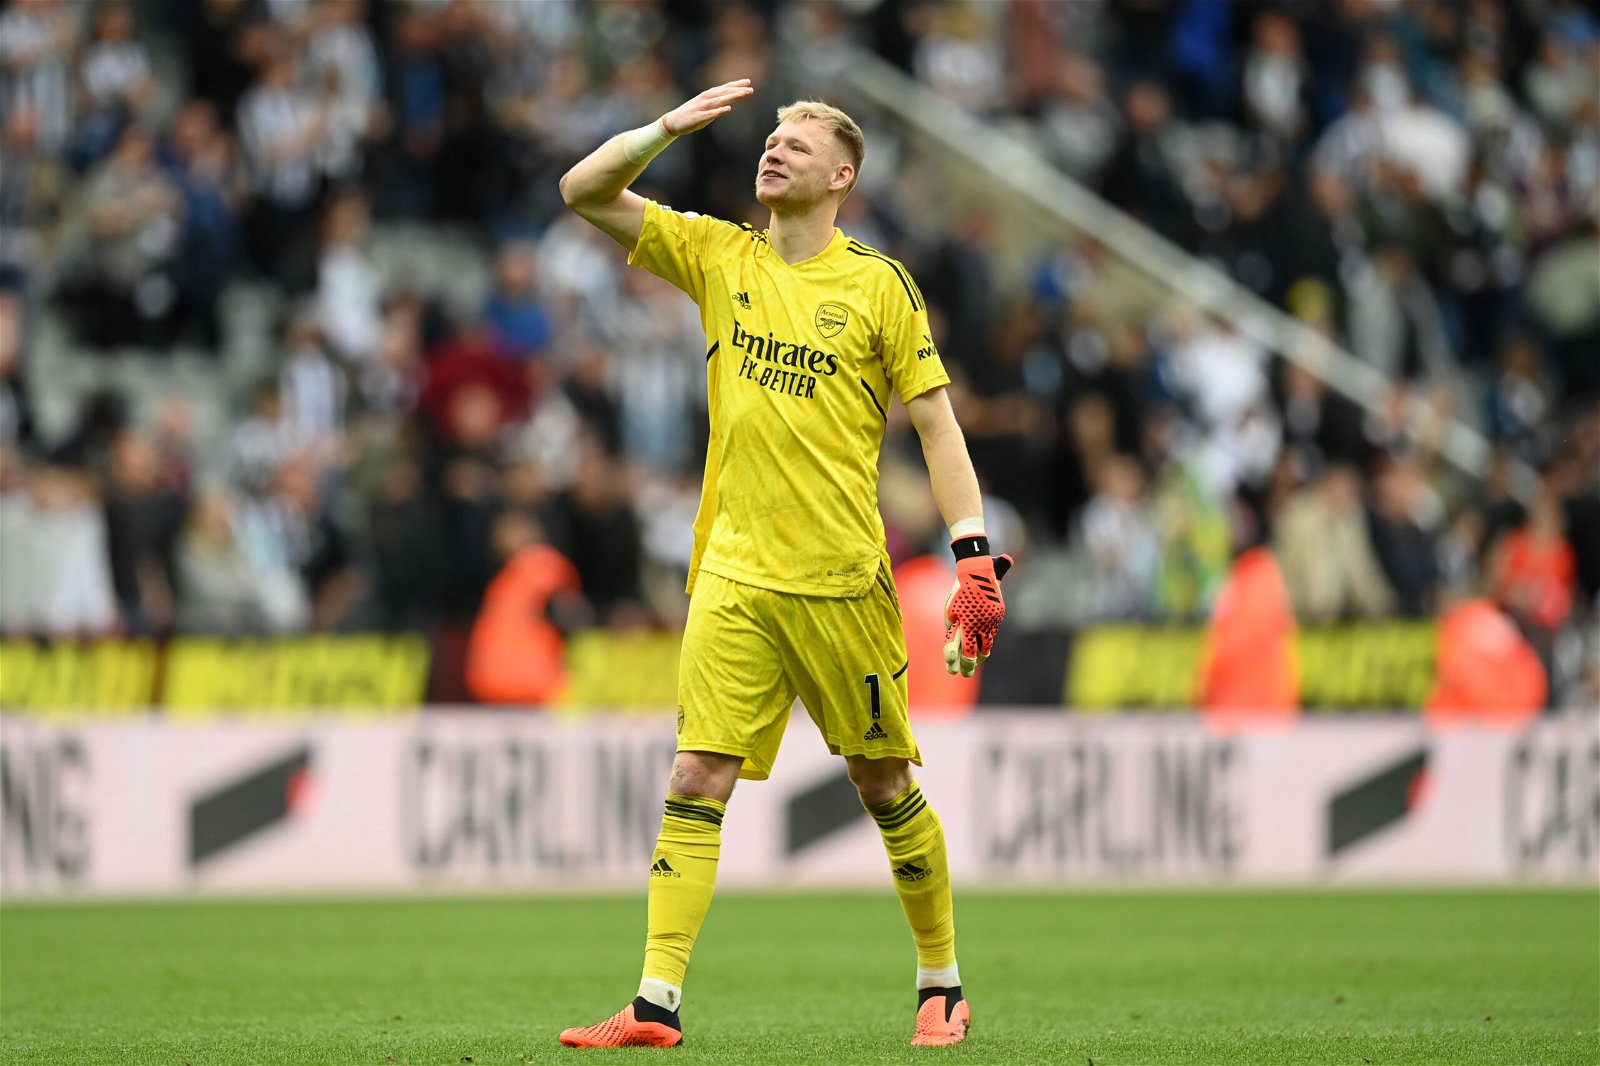 Aaron Ramsdale - €28 million (Sheffield United to Arsenal in 2021): Most expensive goalkeepers